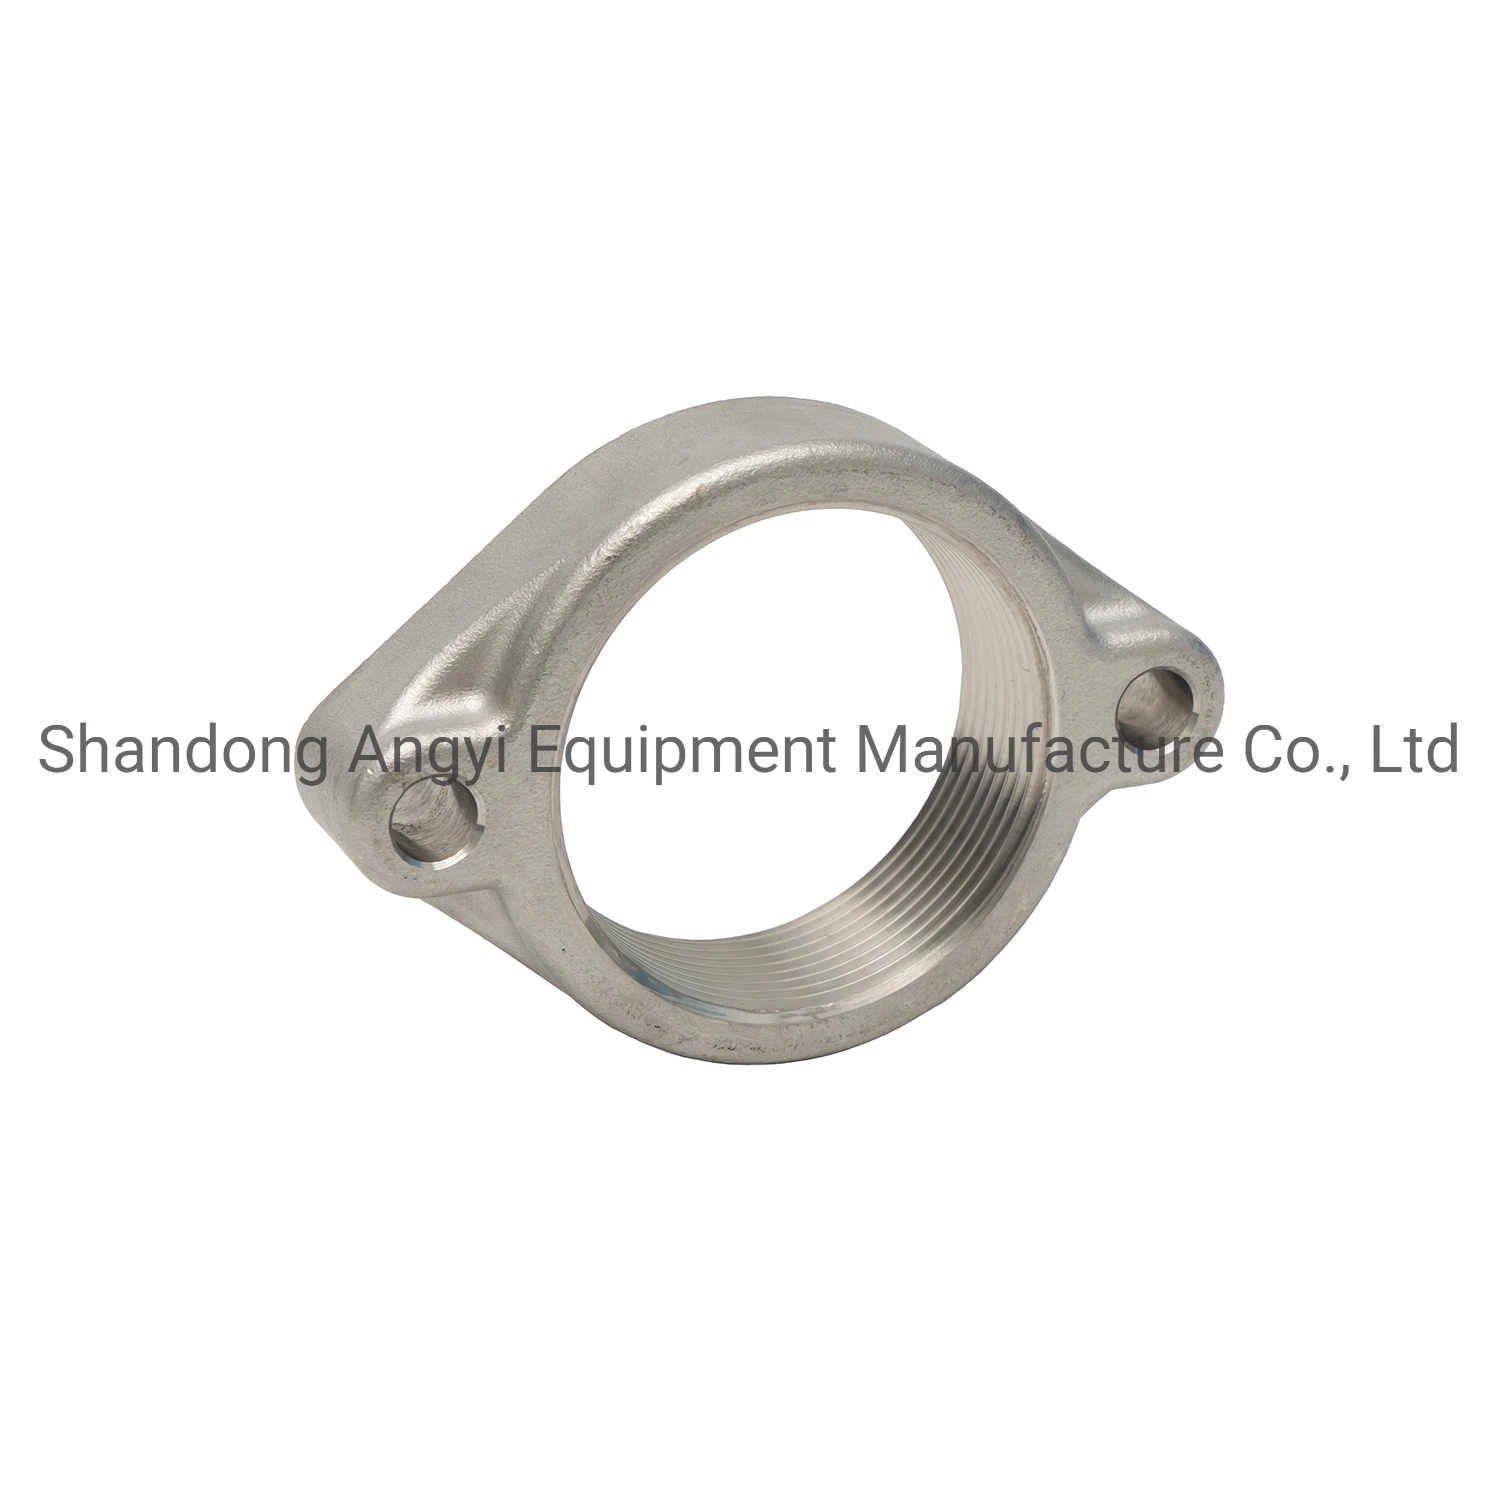 OEM Customized Flange Auto Parts Stainless Steel 1.4308/1.4309/1.4552 Precision Investment Casting Lost Wax Casting/CNC Machining Casting with IATF16949